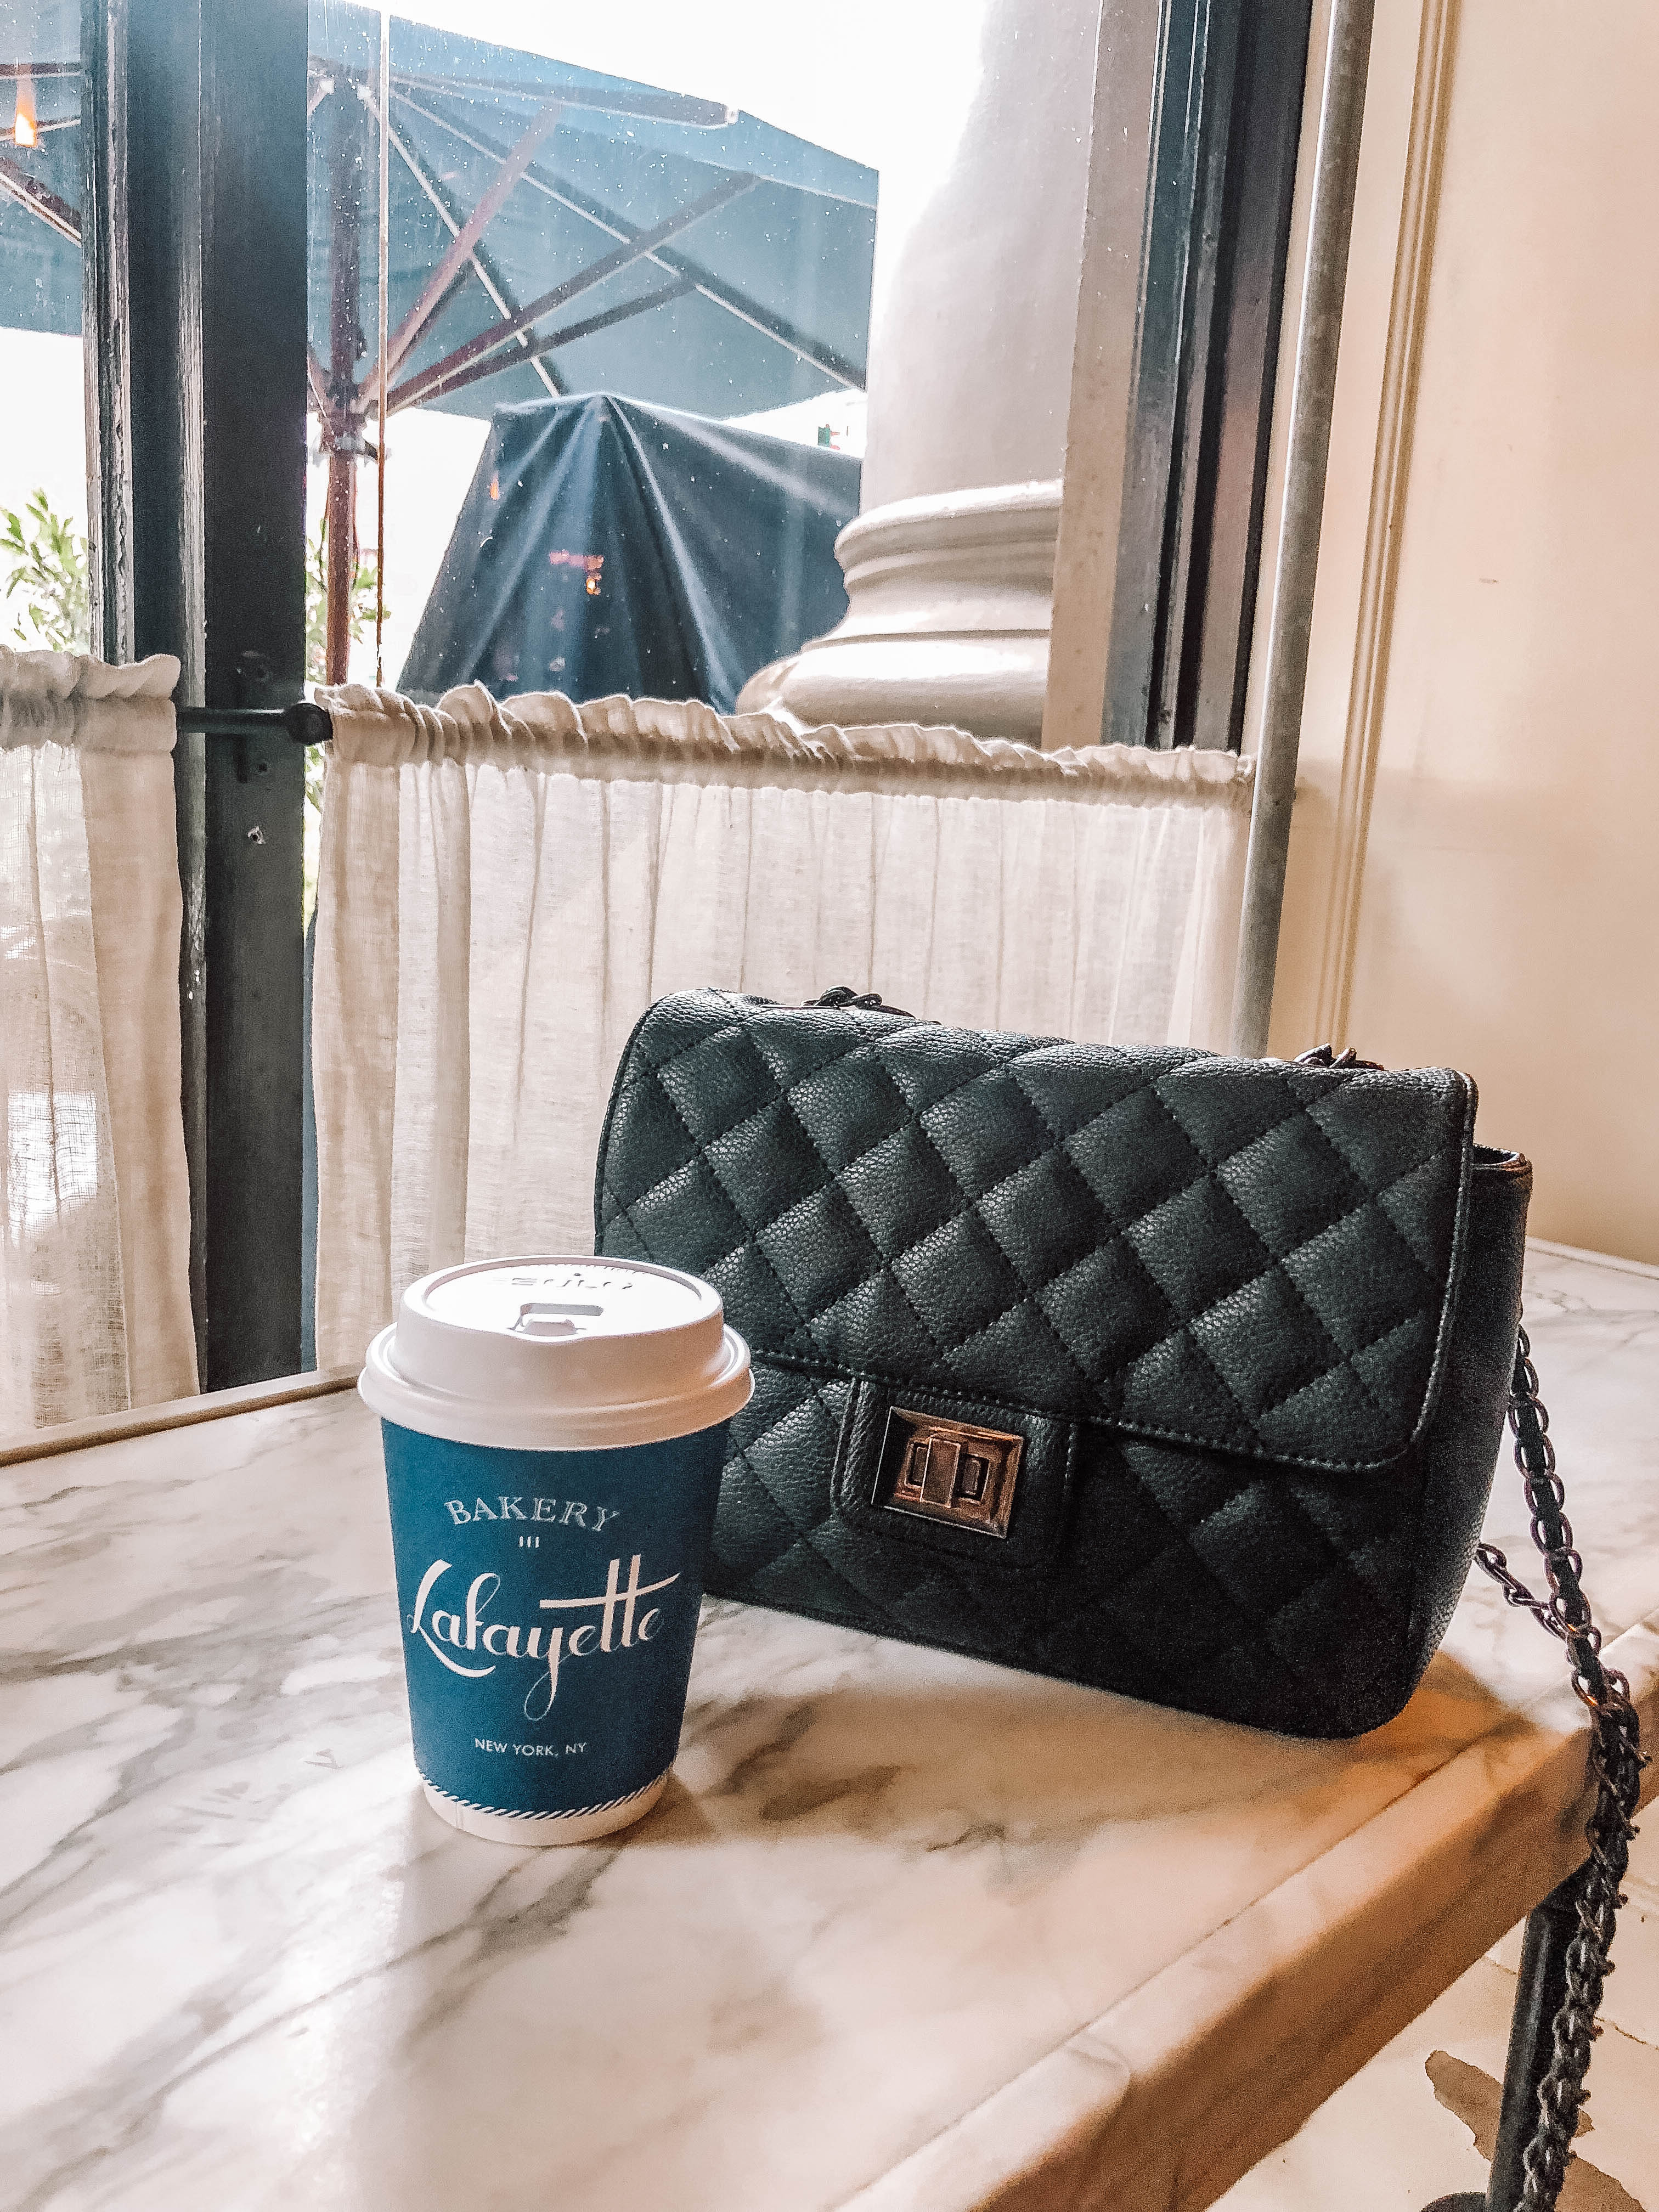 My First NYFW as a lifestyle and fashion blogger Ashley Bell Tallblondebell : Places to Eat Brunch